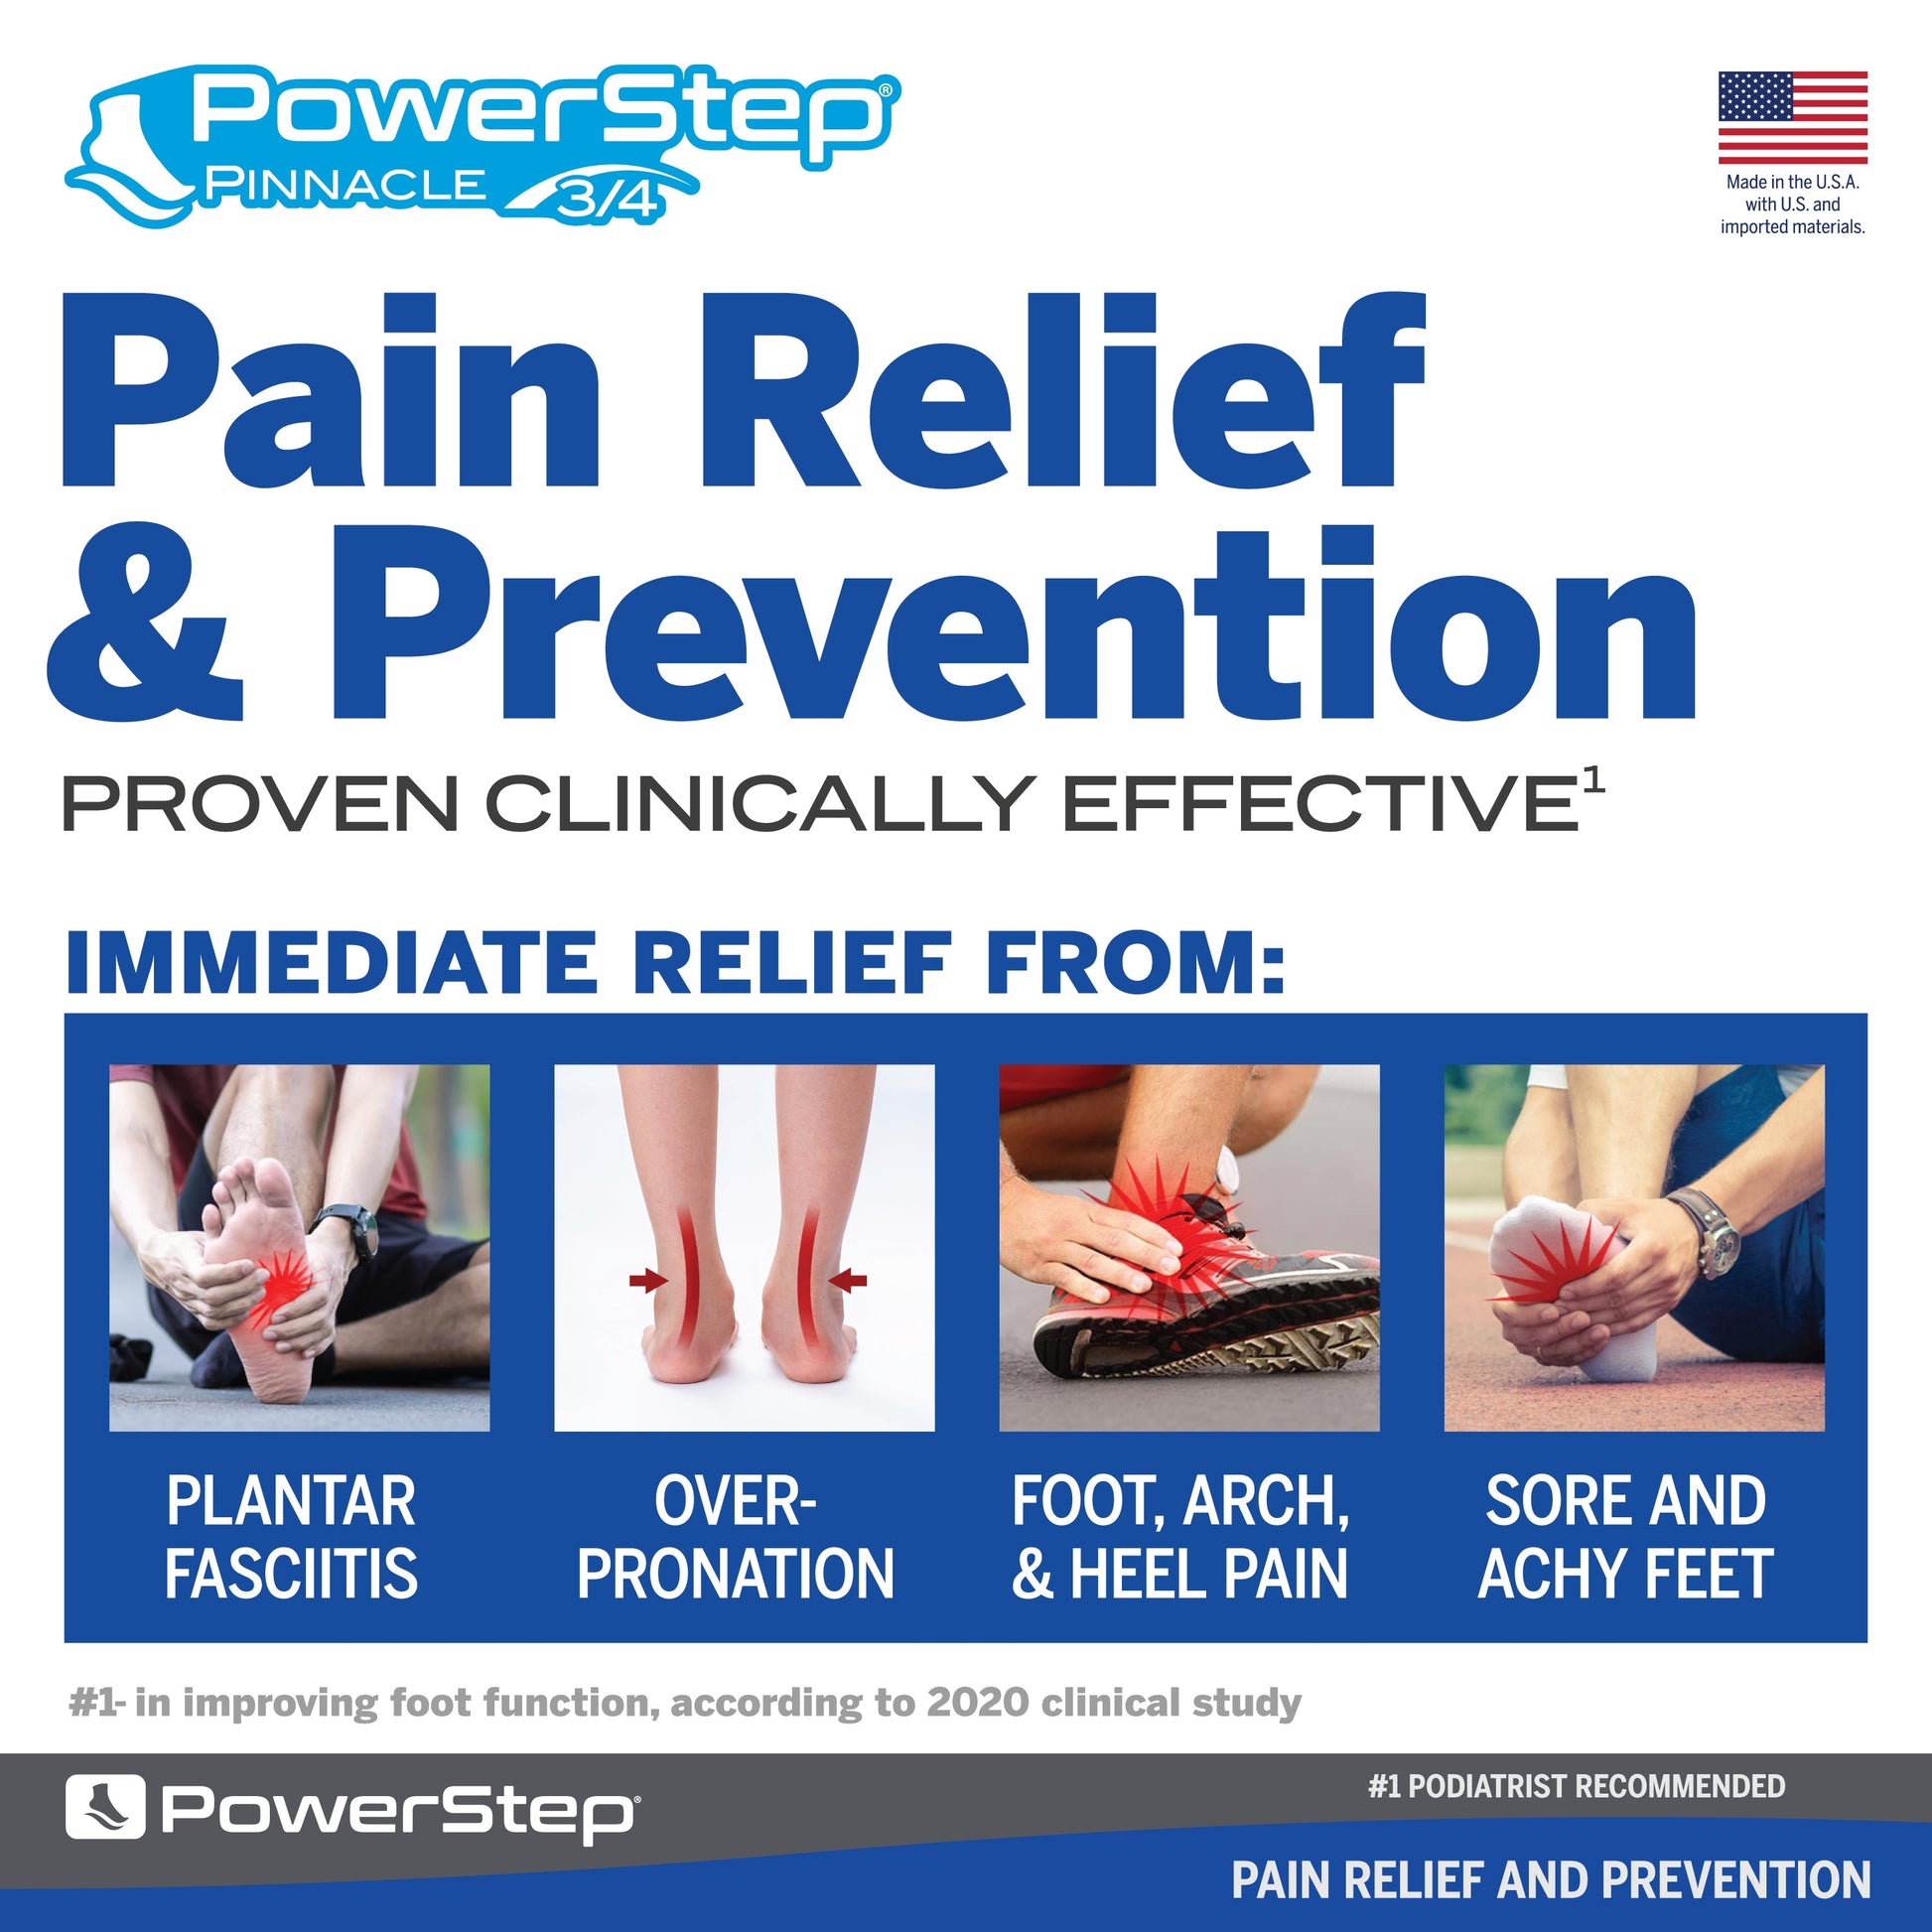 PowerStep Pinnacle 3/4 Neutral Orthotic Shoe Insoles, Made in the USA with US and imported materials, pain relief and prevention, proven clinically effective for immediate relief from plantar fasciitis, overpronation, foot, arch, and heel pain, sore, achy feet, number one in improving foot function according to 2020 clinical study, number one podiatrist recommended shoe orthotic for arch support, unisex orthotic arch support 3/4 insoles for tight fitting shoes